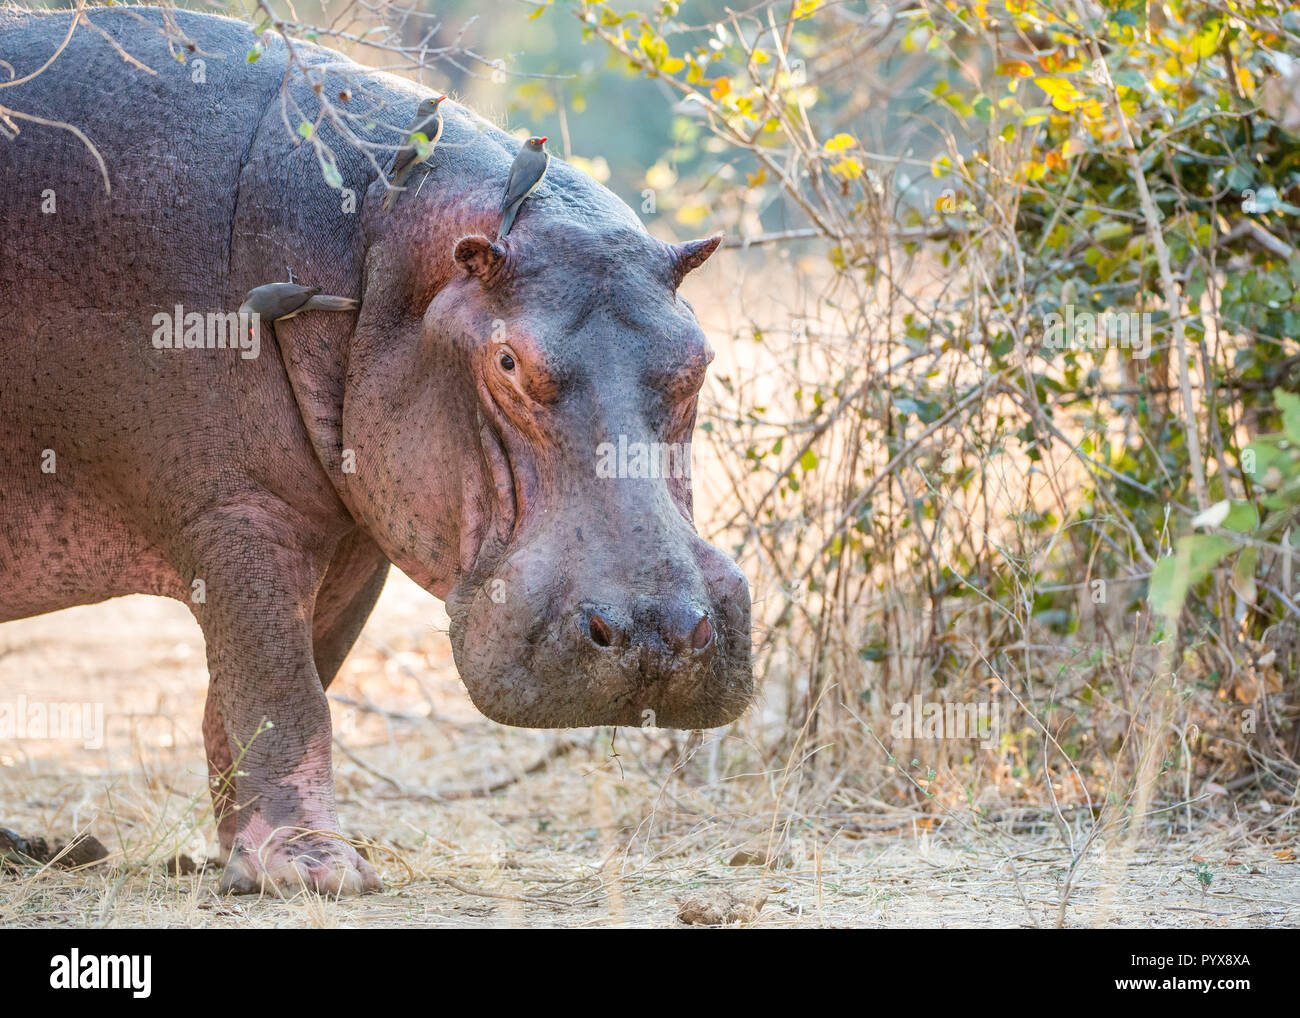 Large Hippo out of water Stock Photo